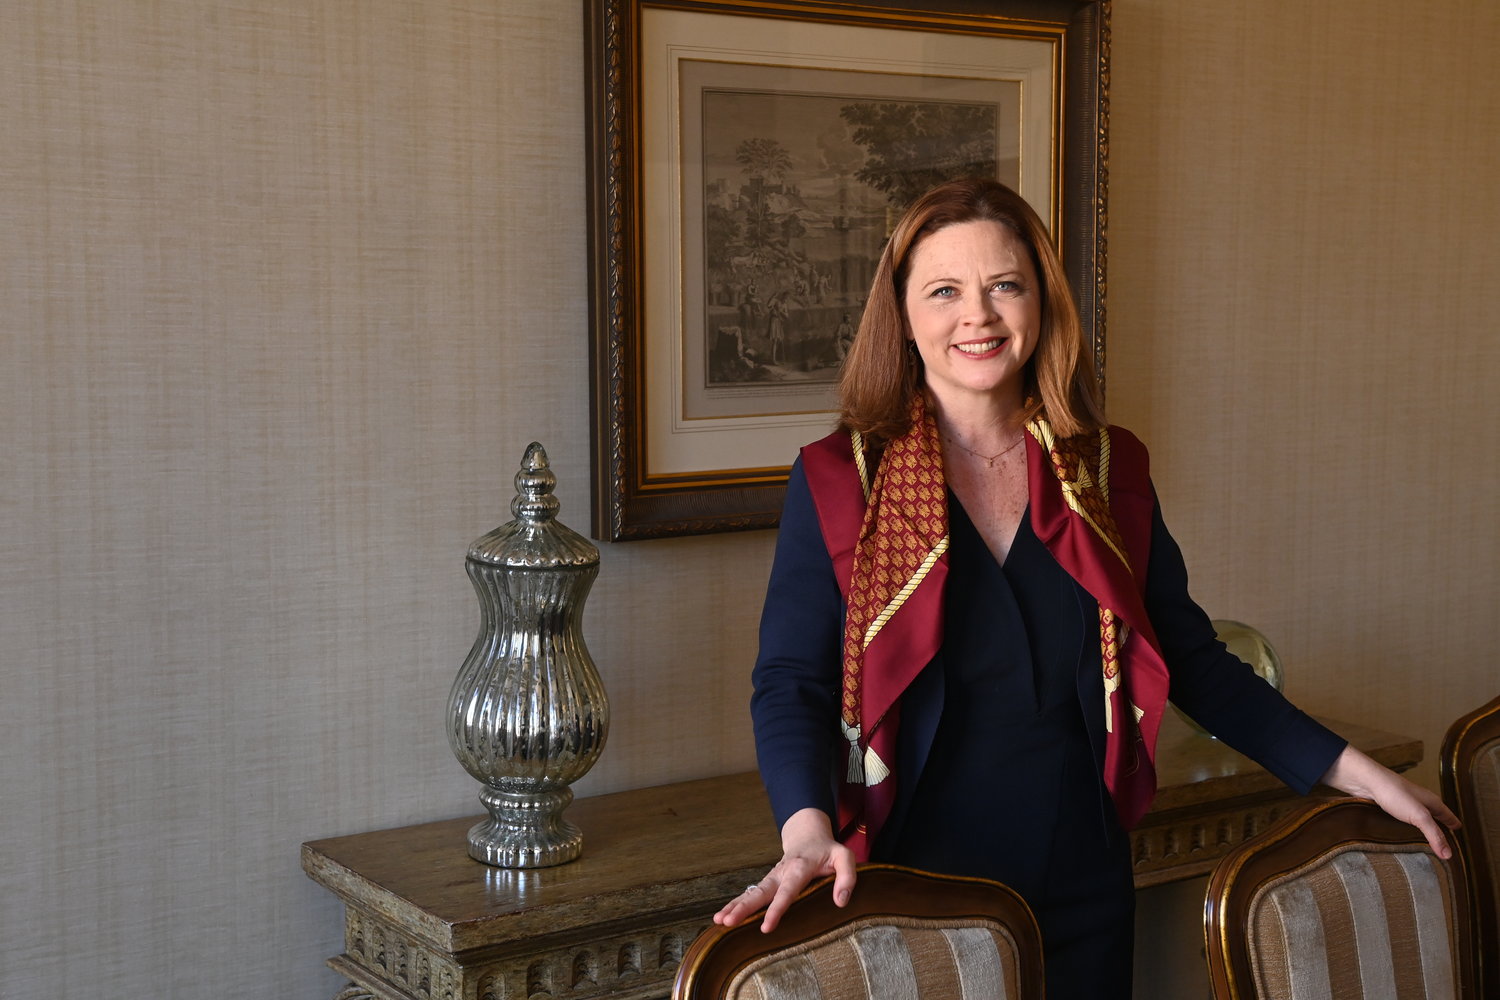 Tania Tetlow has been named the 33rd president of Fordham University. She will be the first layperson and first woman to lead the university in its 181-year history. Her tenure begins July 1.